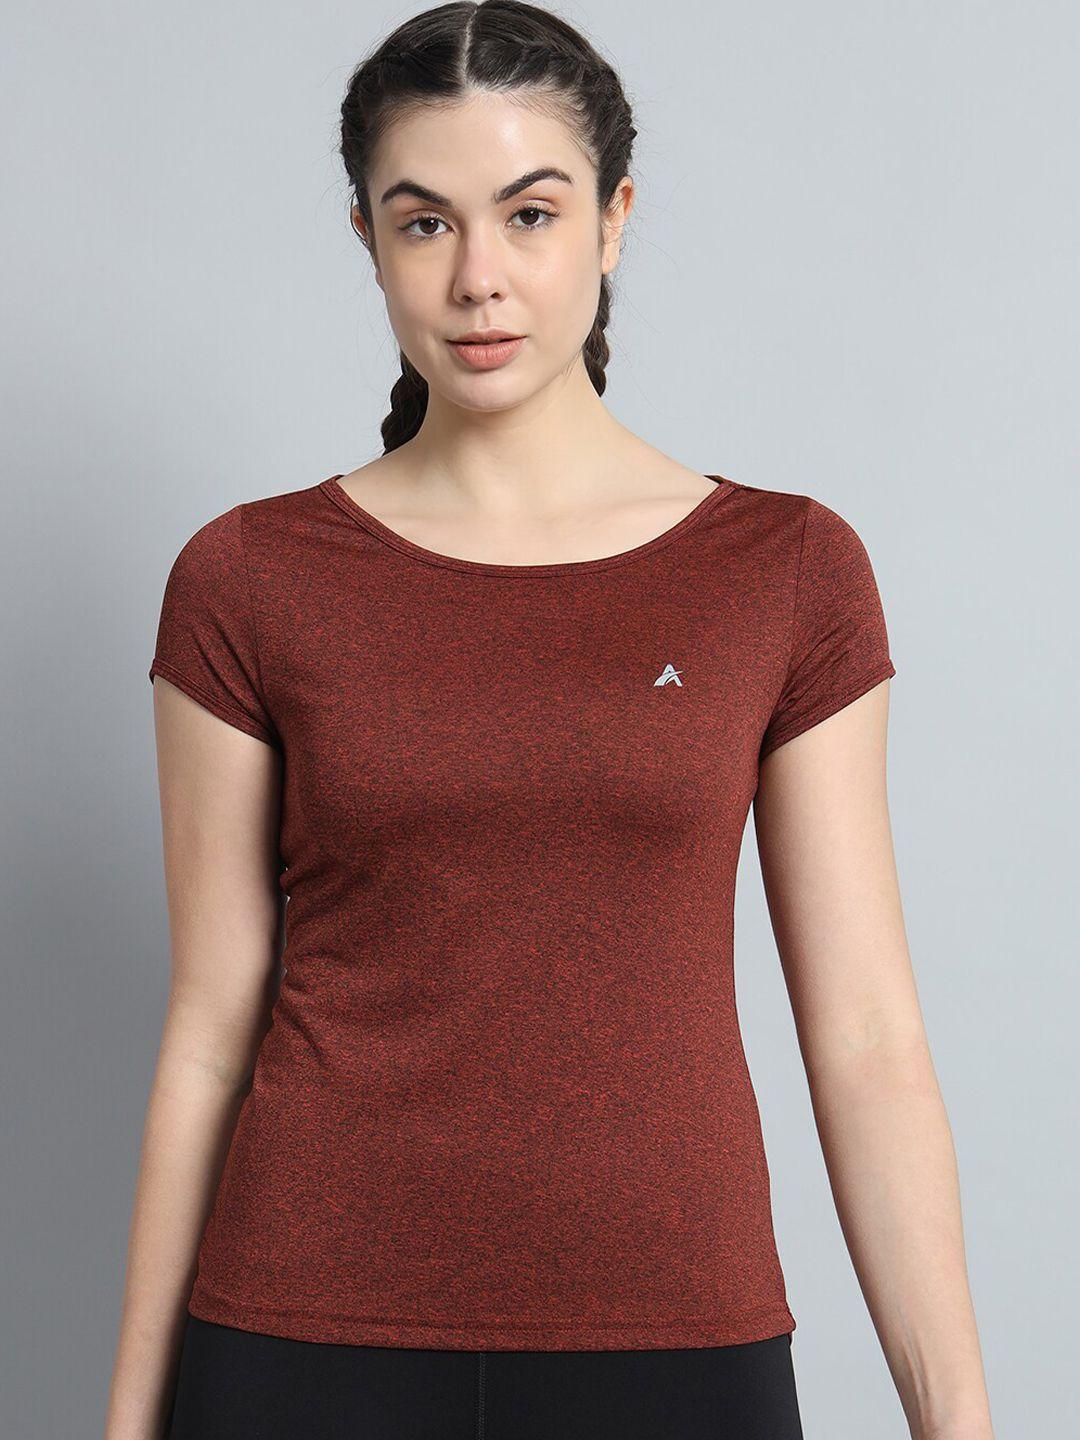 athlisis women rust extended sleeves e-dry slim fit t-shirt